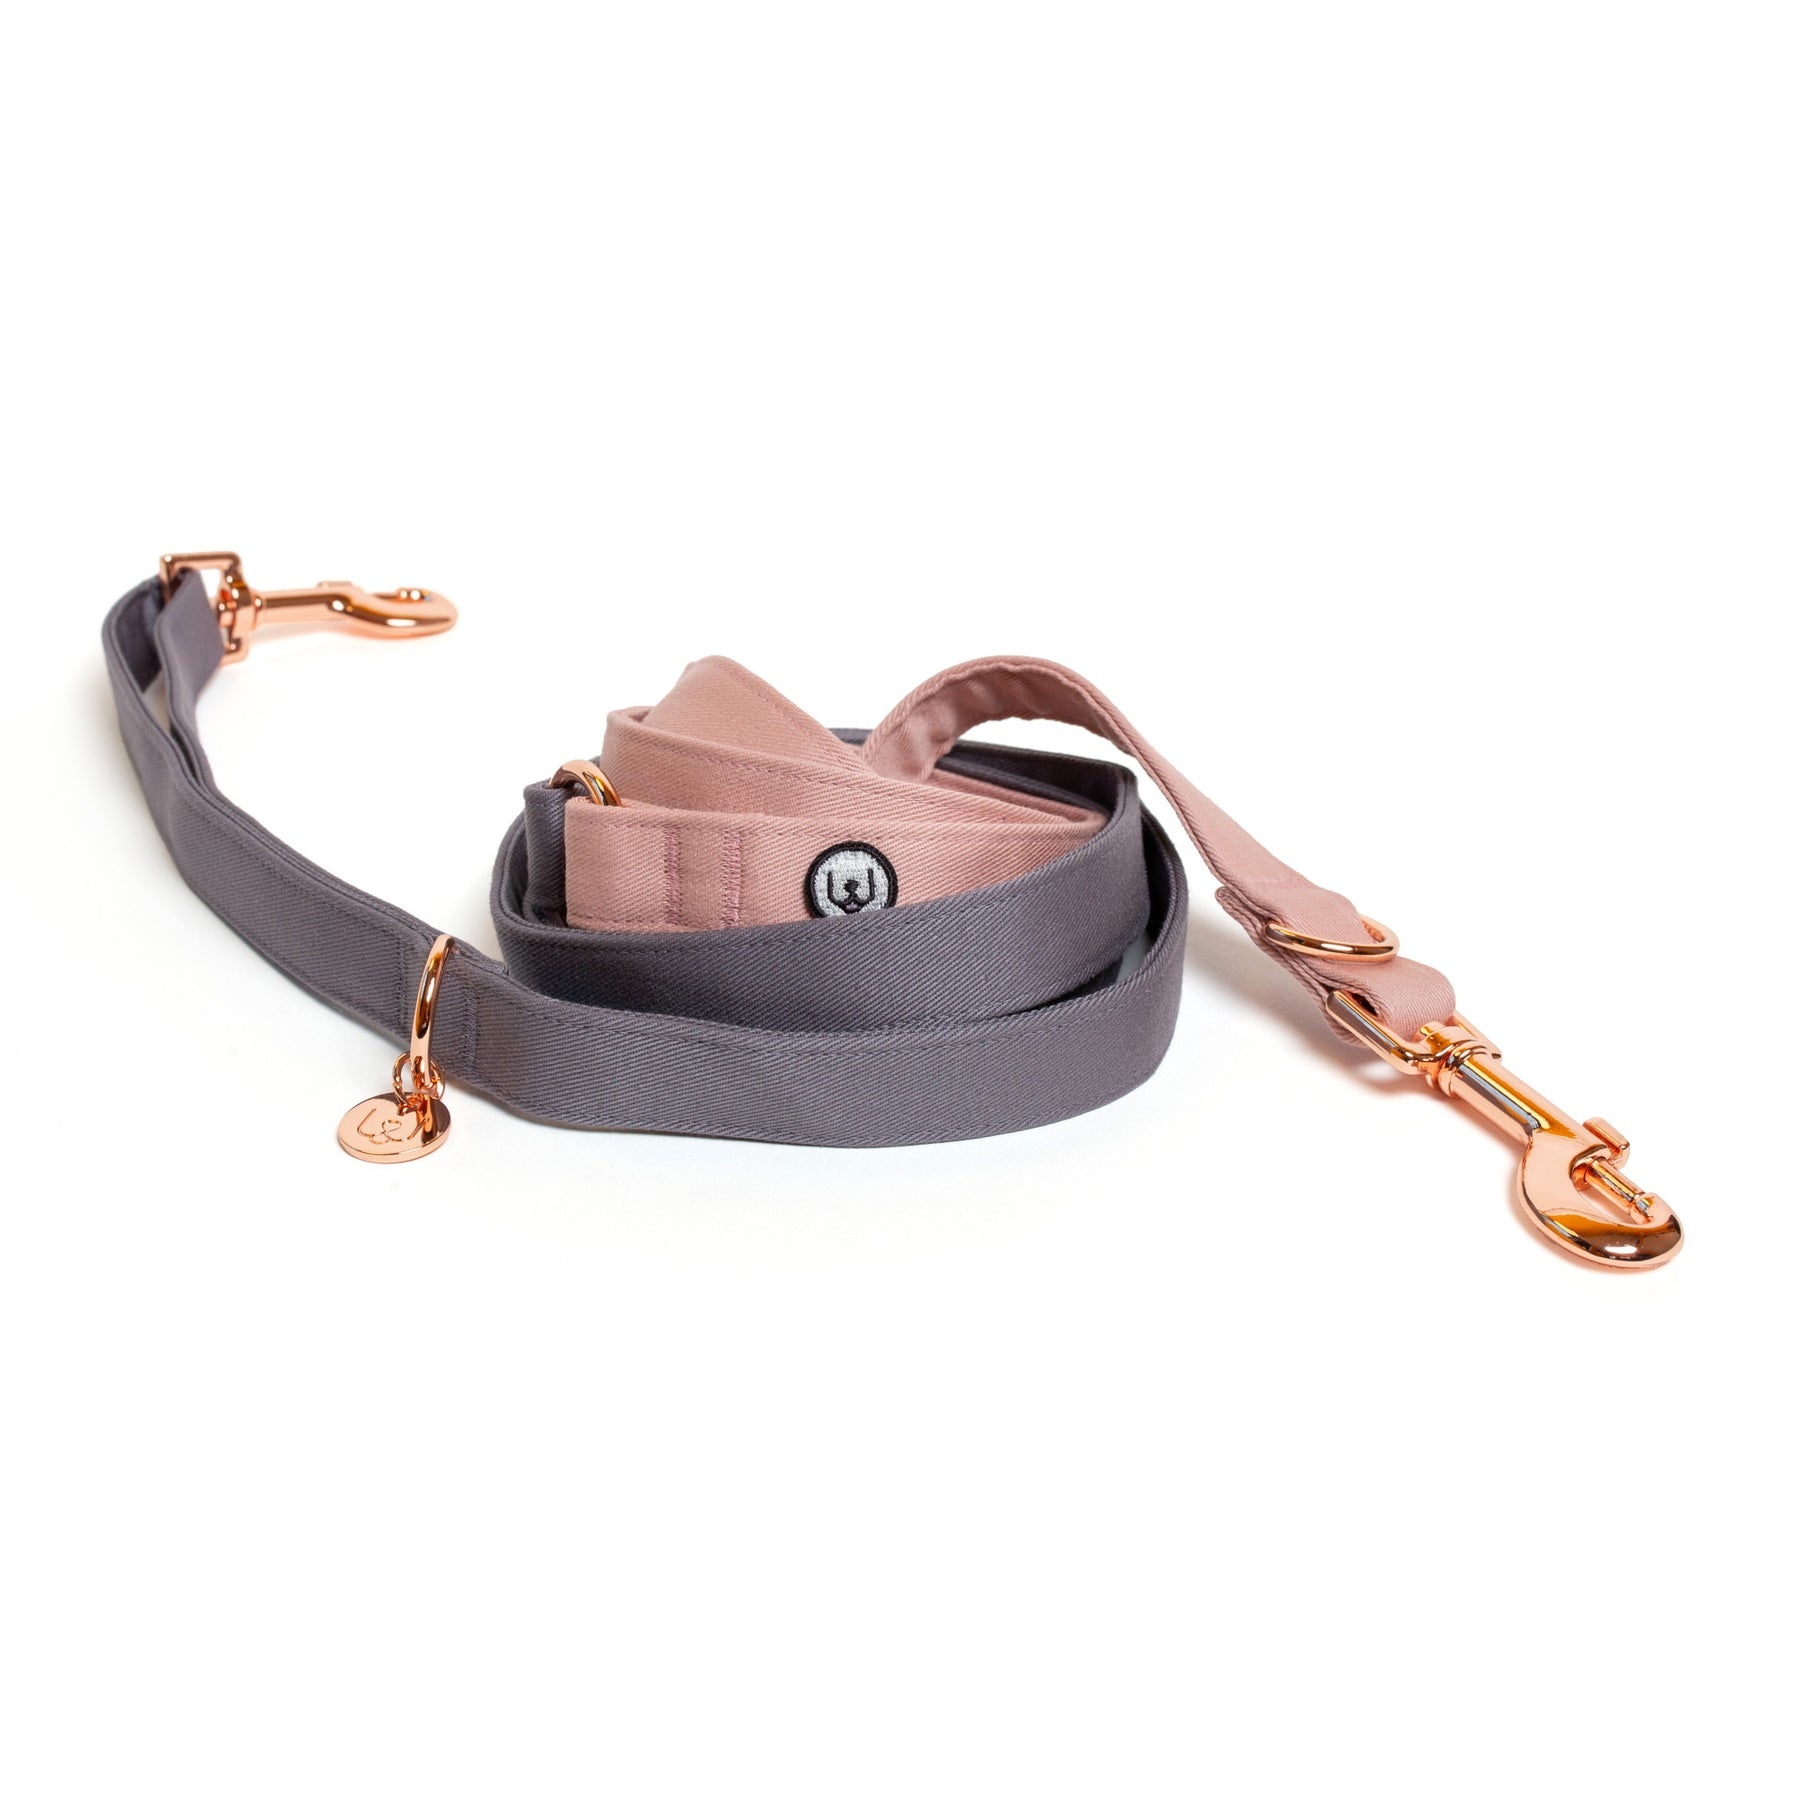 Eat Play Wag Eat Play Wag - Gray-Rose Convertible Leash